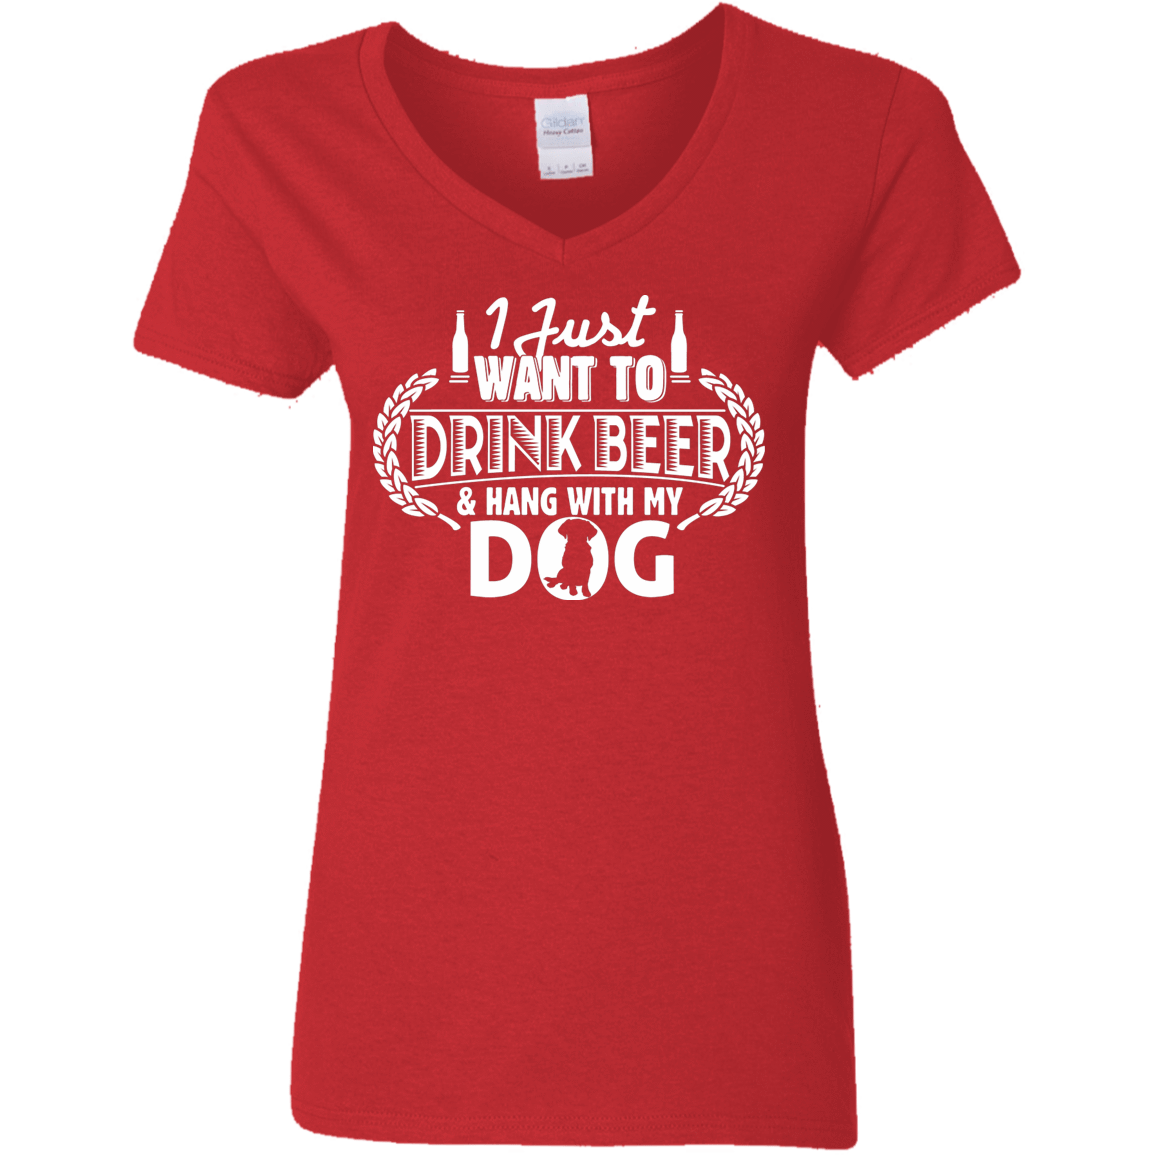 Drink Beer hang With My Dog - Ladies V Neck.